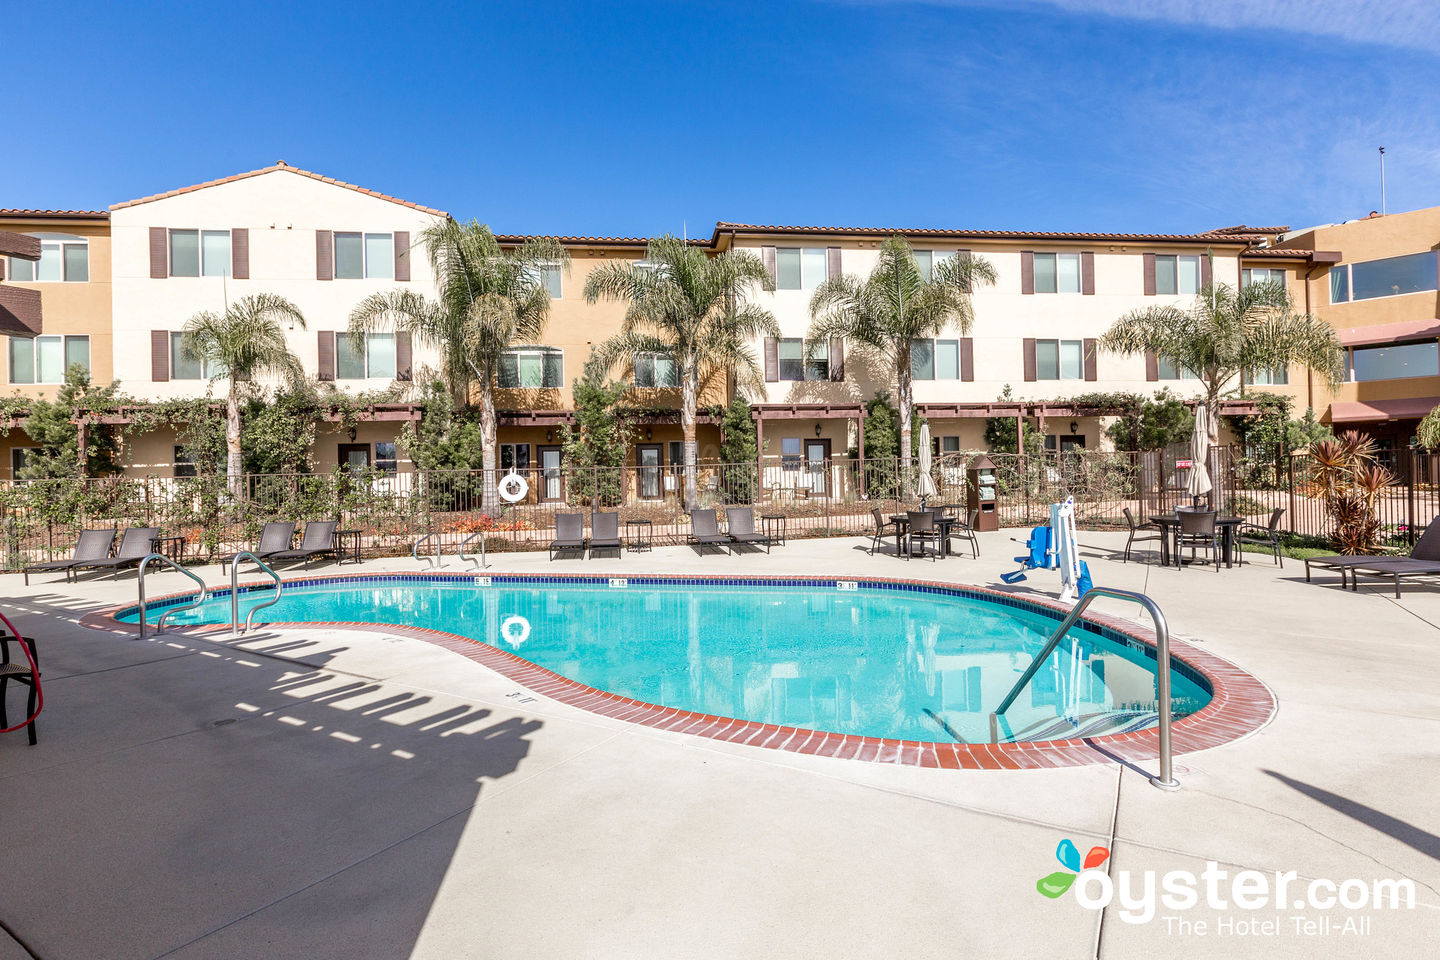 Hilton Garden Inn Pismo Beach Review What To Really Expect If You Stay